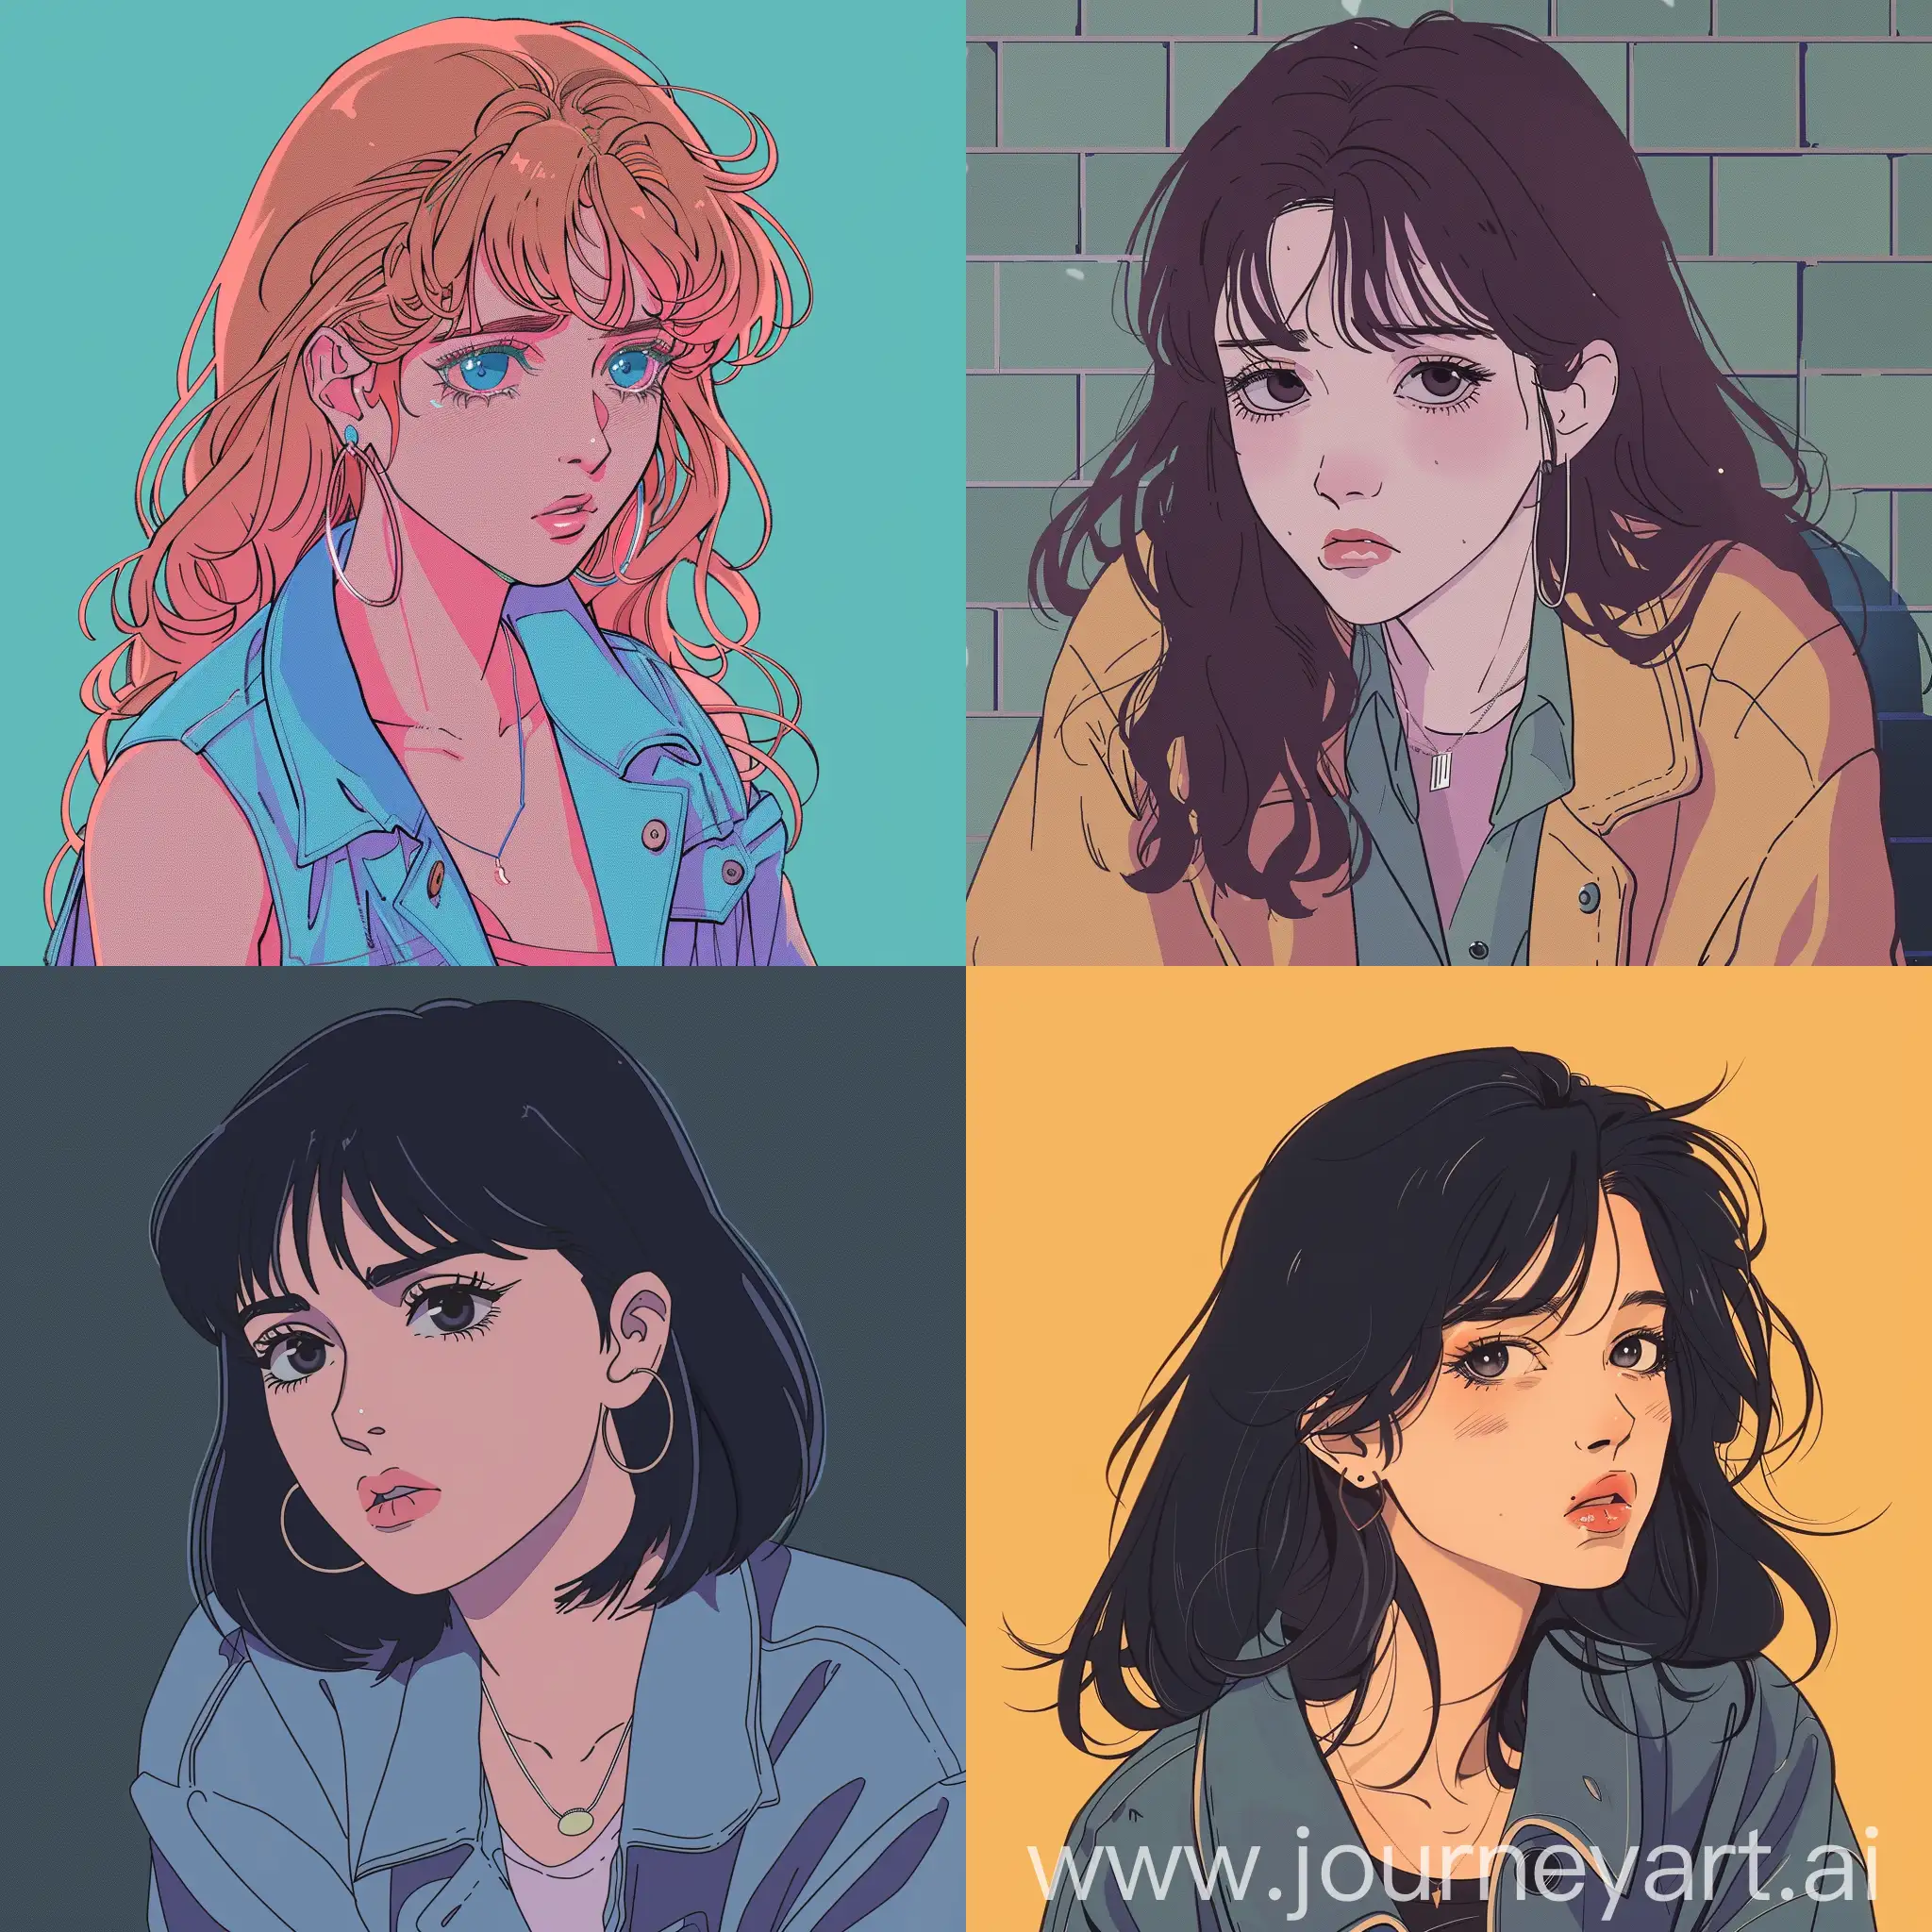 Emotional woman 90s anime style